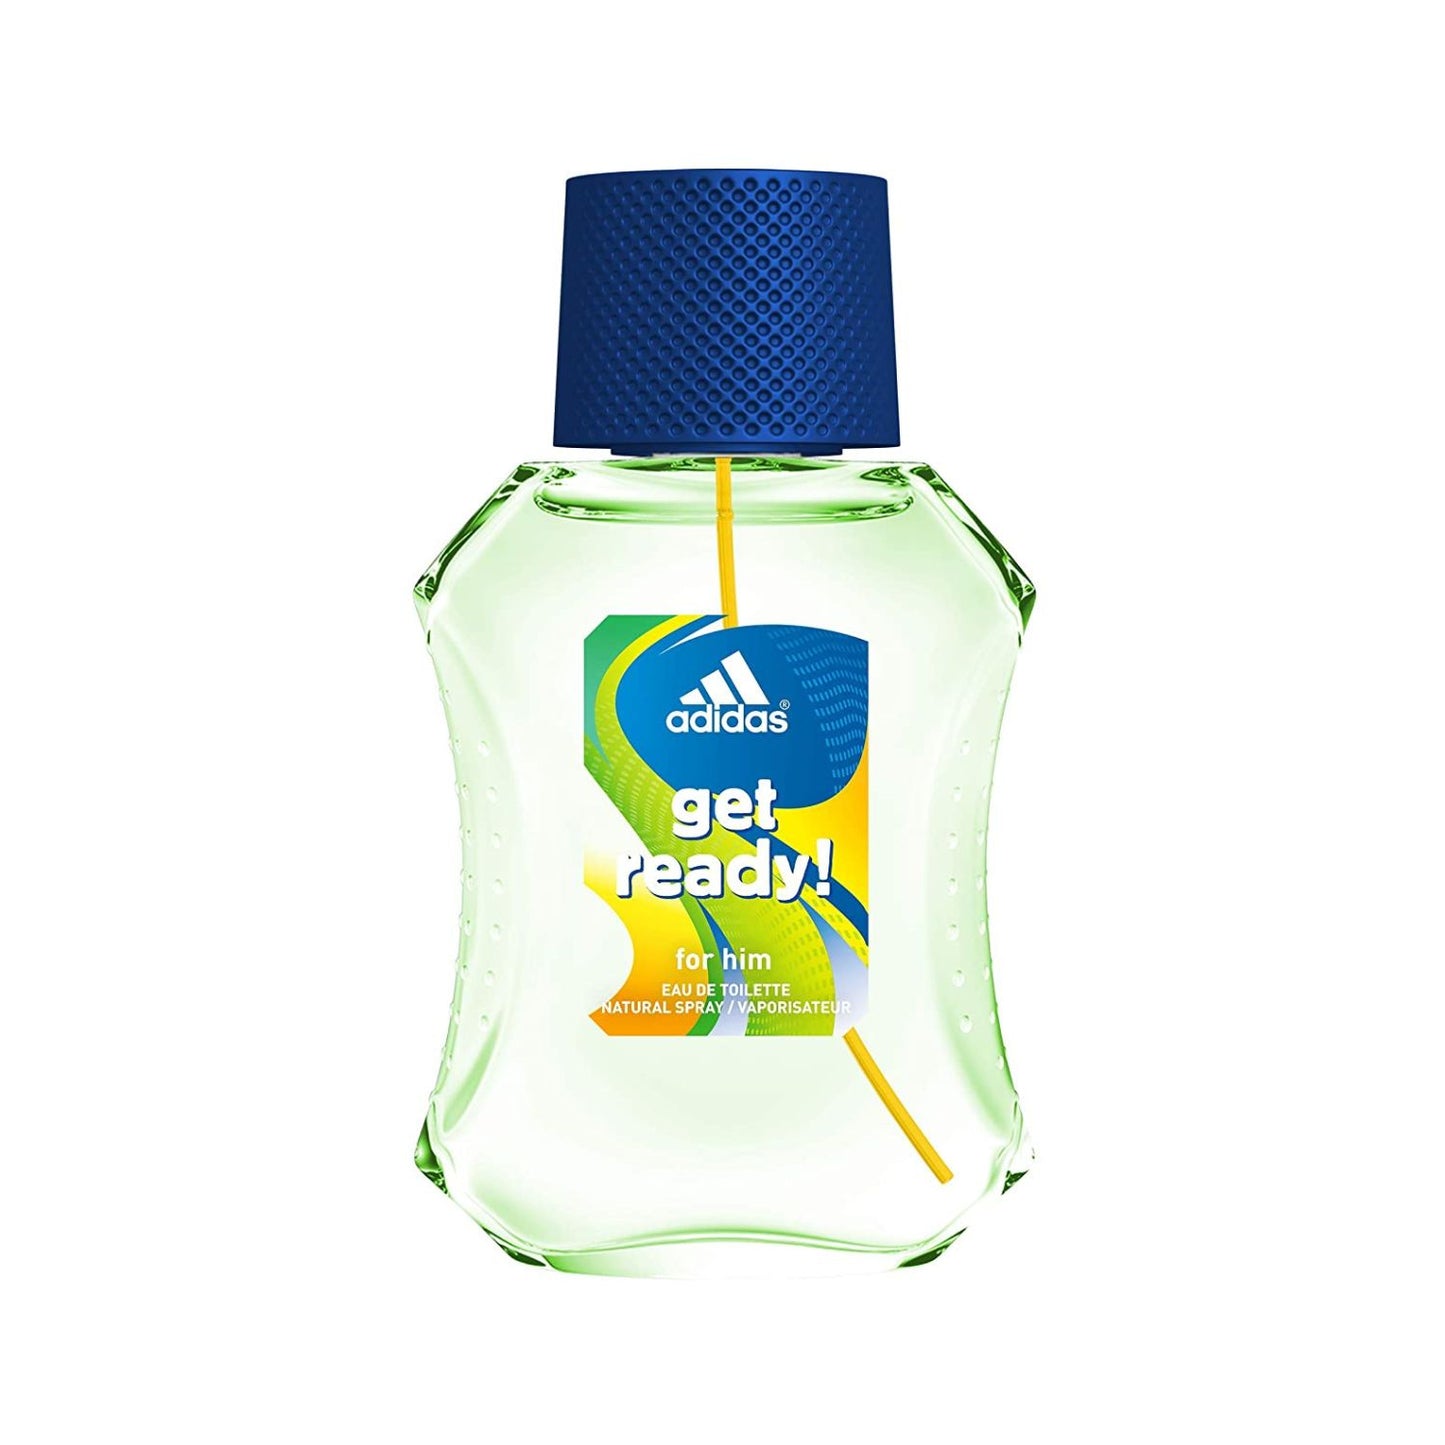 Bid on 300 X BOTTLES OF ADIDAS FRAGRANCE GET READY FOR HIM COLOGNES, 1.7 OZ- Buy &amp; Sell on Auction with EAMA Group